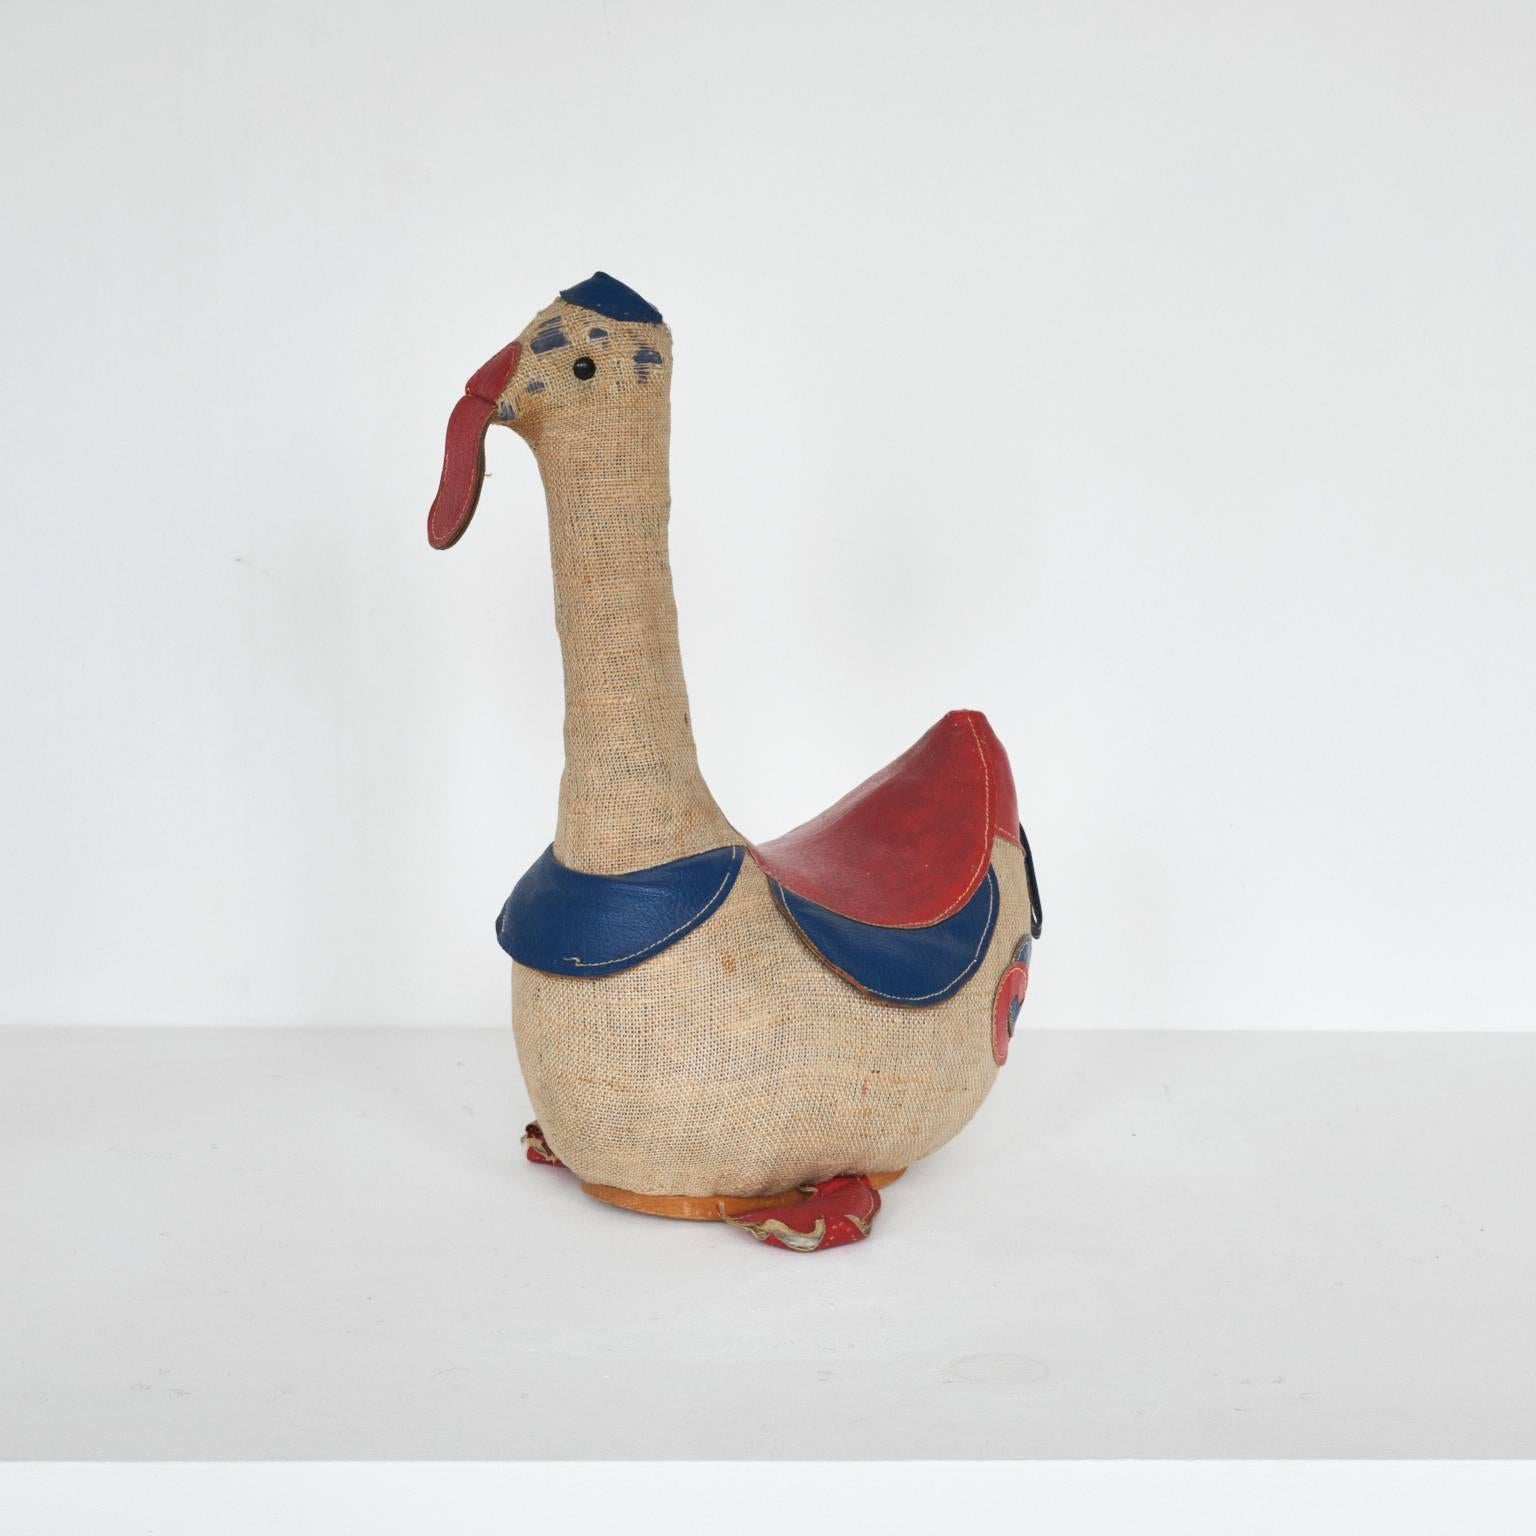 Rocking Duck, Therapeutic toy created in 1967 by Renate Müller in Sonneberg, pictured in the book “Renate Müller Toys and Design”, p. 26.